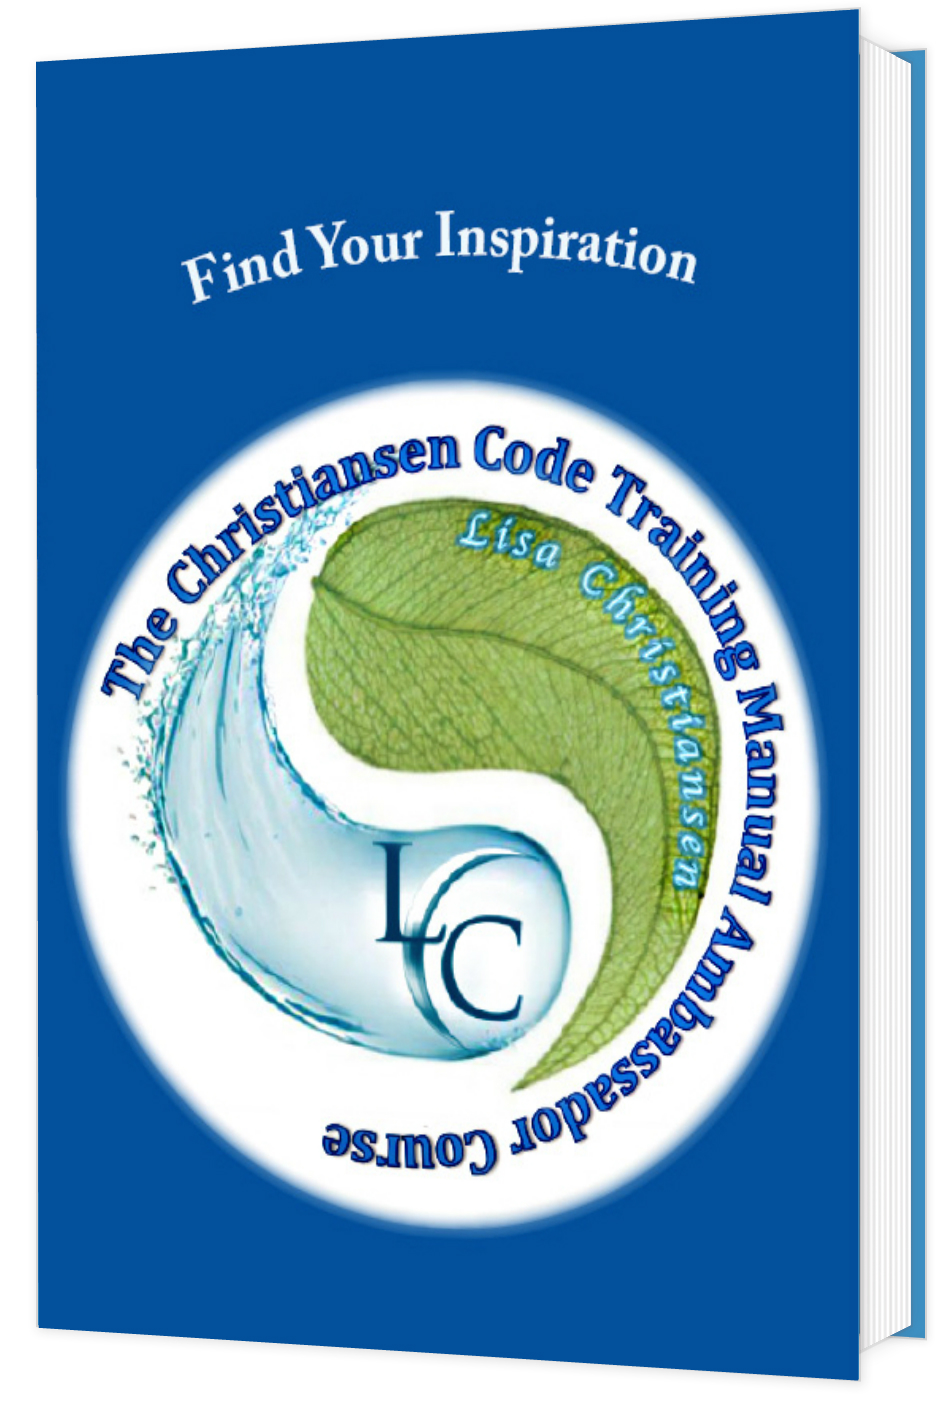 A guide for providing knowledge to individuals striving to become a Christiansen Code fitness Ambassador and for gaining additional knowledge around fitness and training. The Ultimate Resource for inner balance. http://amzn.com/0692493964